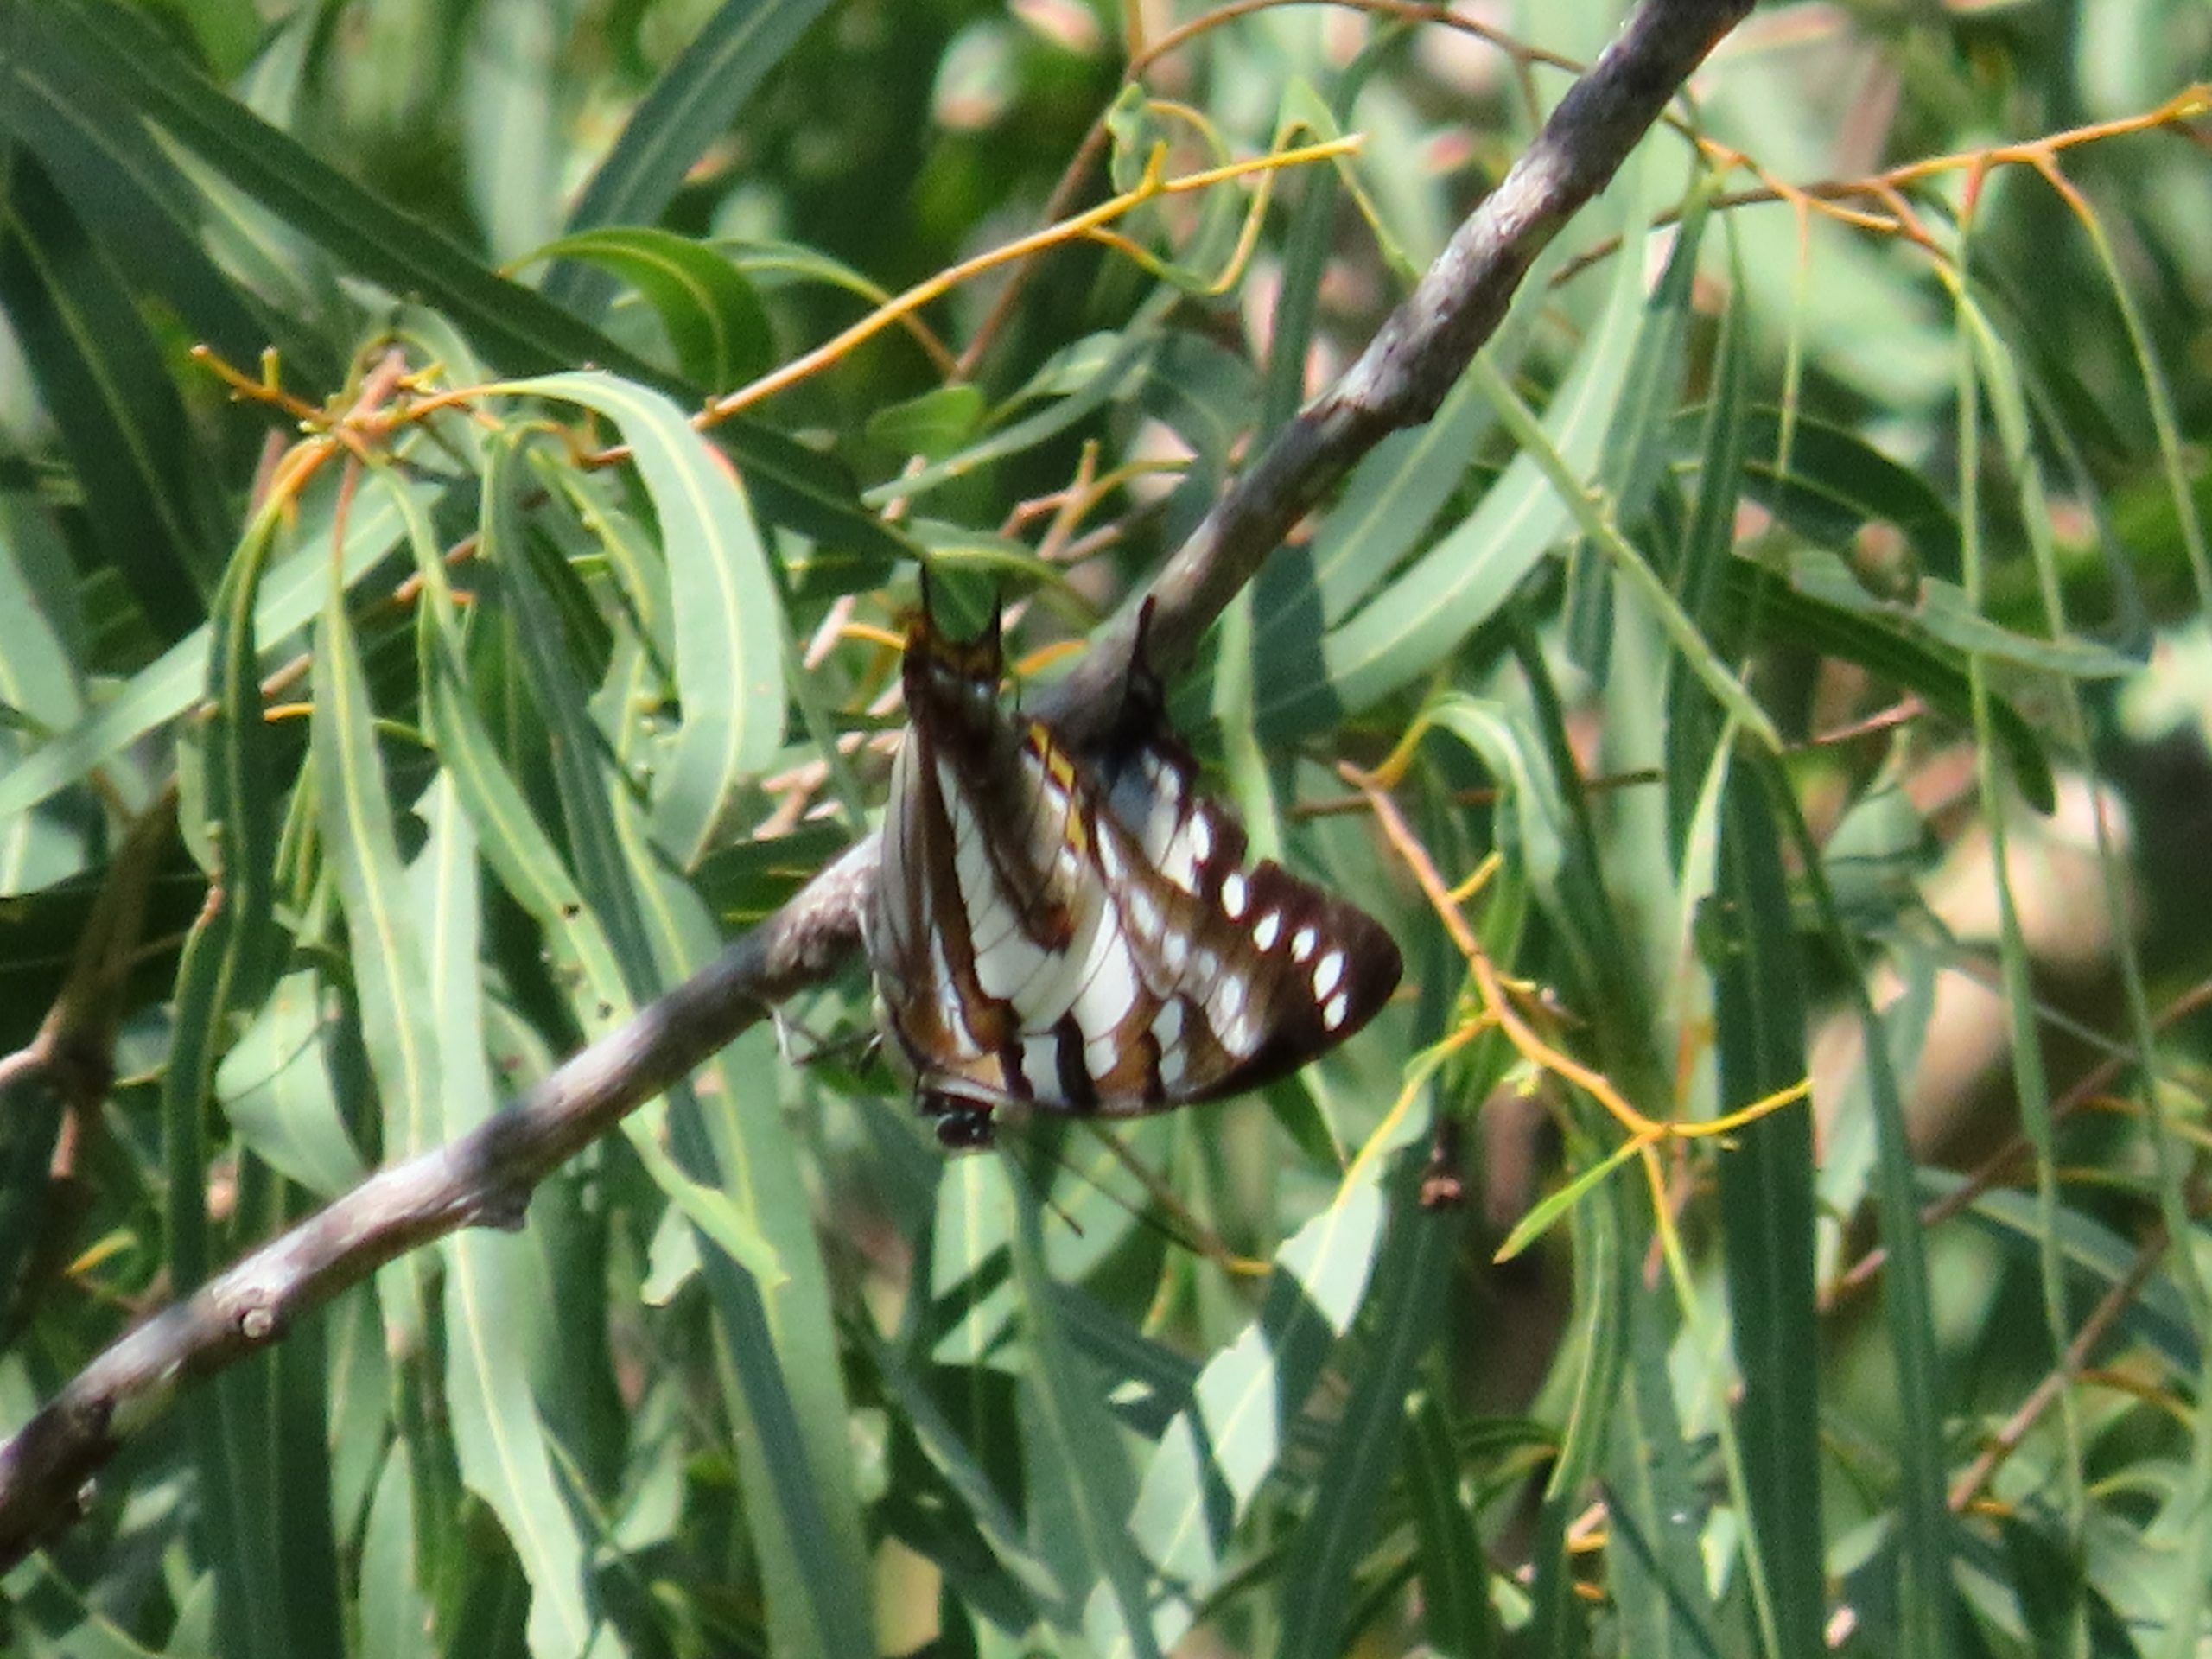 Tailed Emperor butterfly at Cunningham’s Crest Lookout